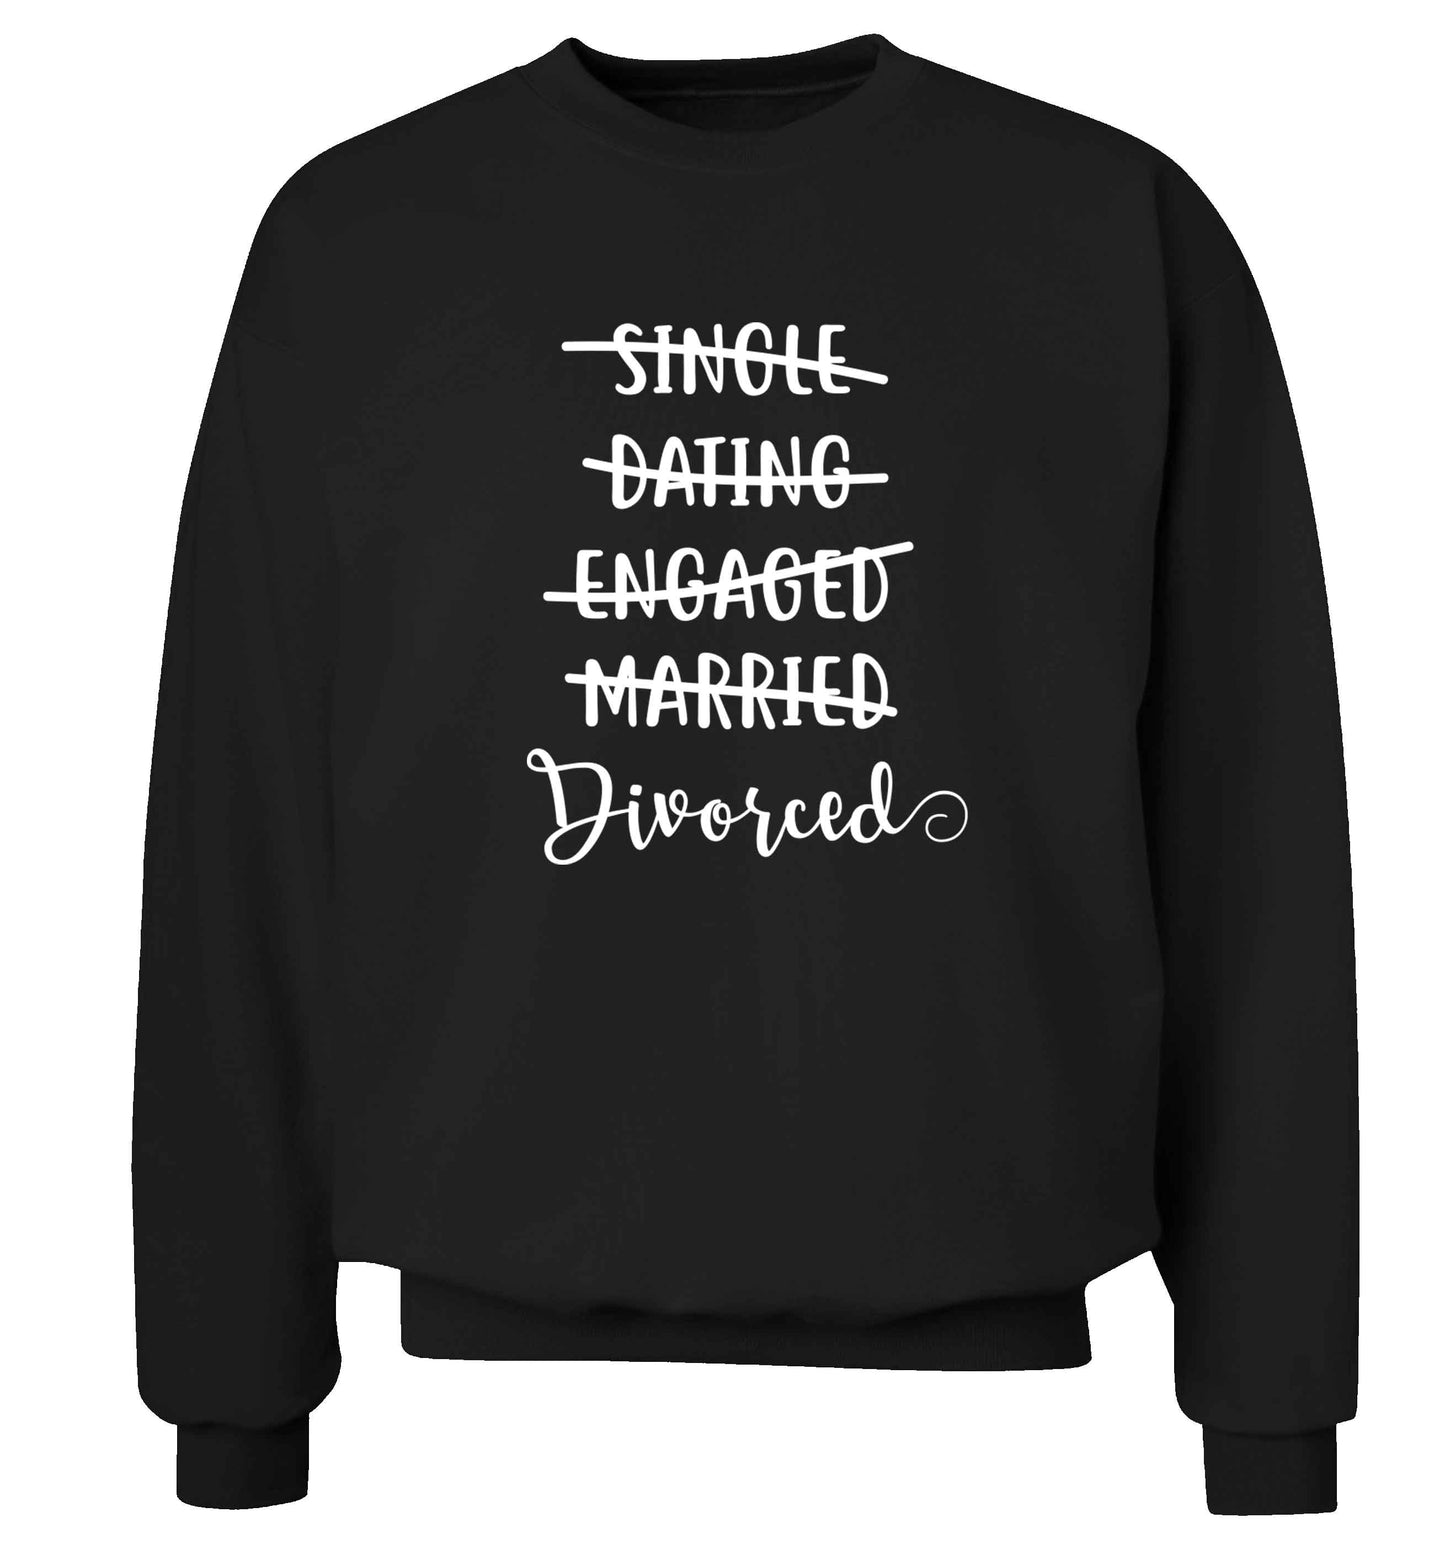 Single, dating, engaged, divorced Adult's unisex black Sweater 2XL